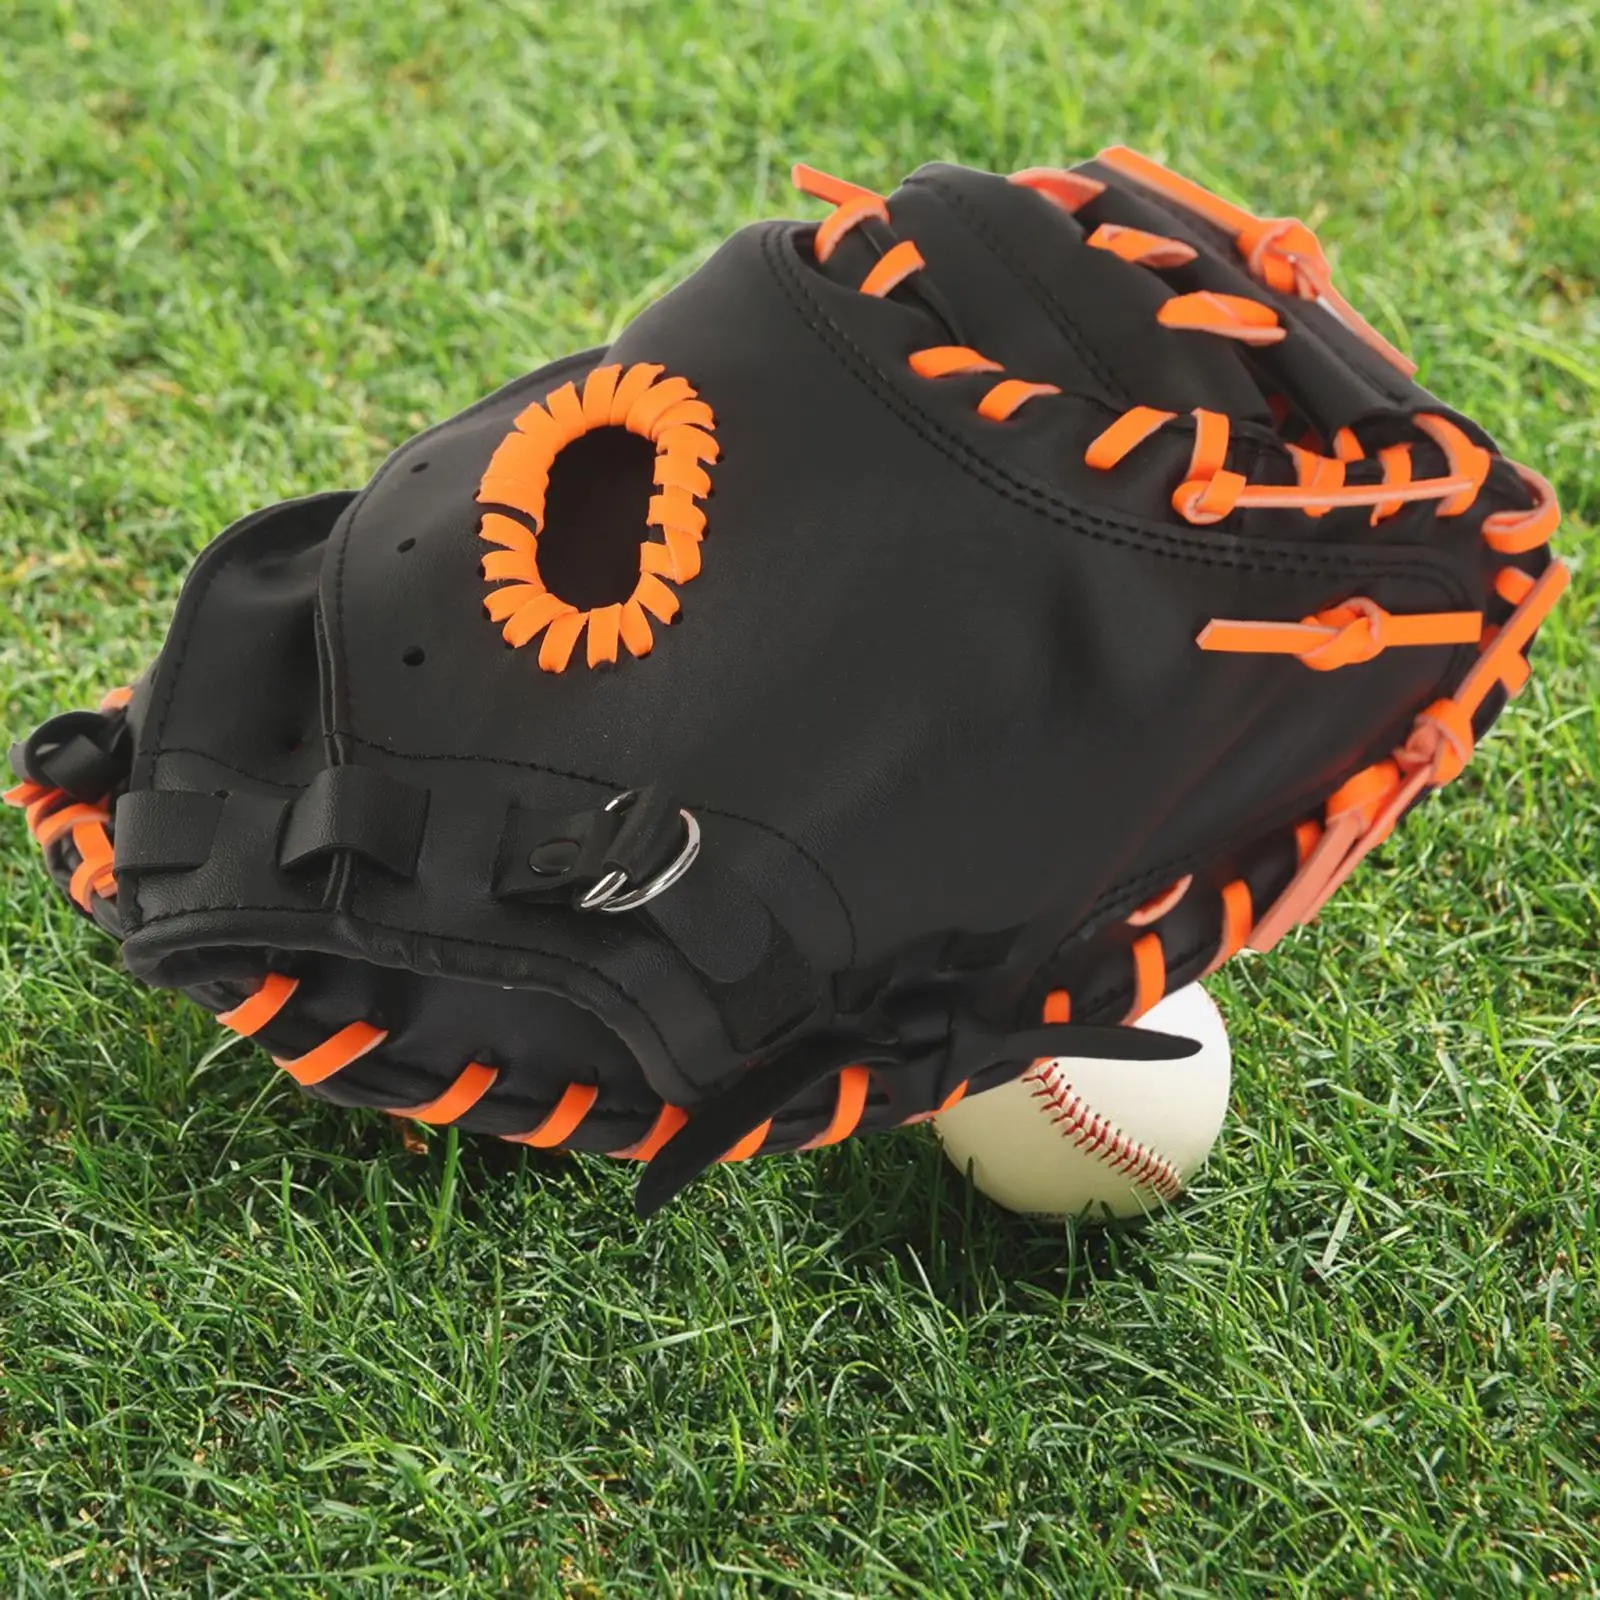 Baseball Gloves Right Hand Throw Left Hand Use Baseball Fielding Glove Baseball Softball Gloves for Adults Match Outdoor Sports